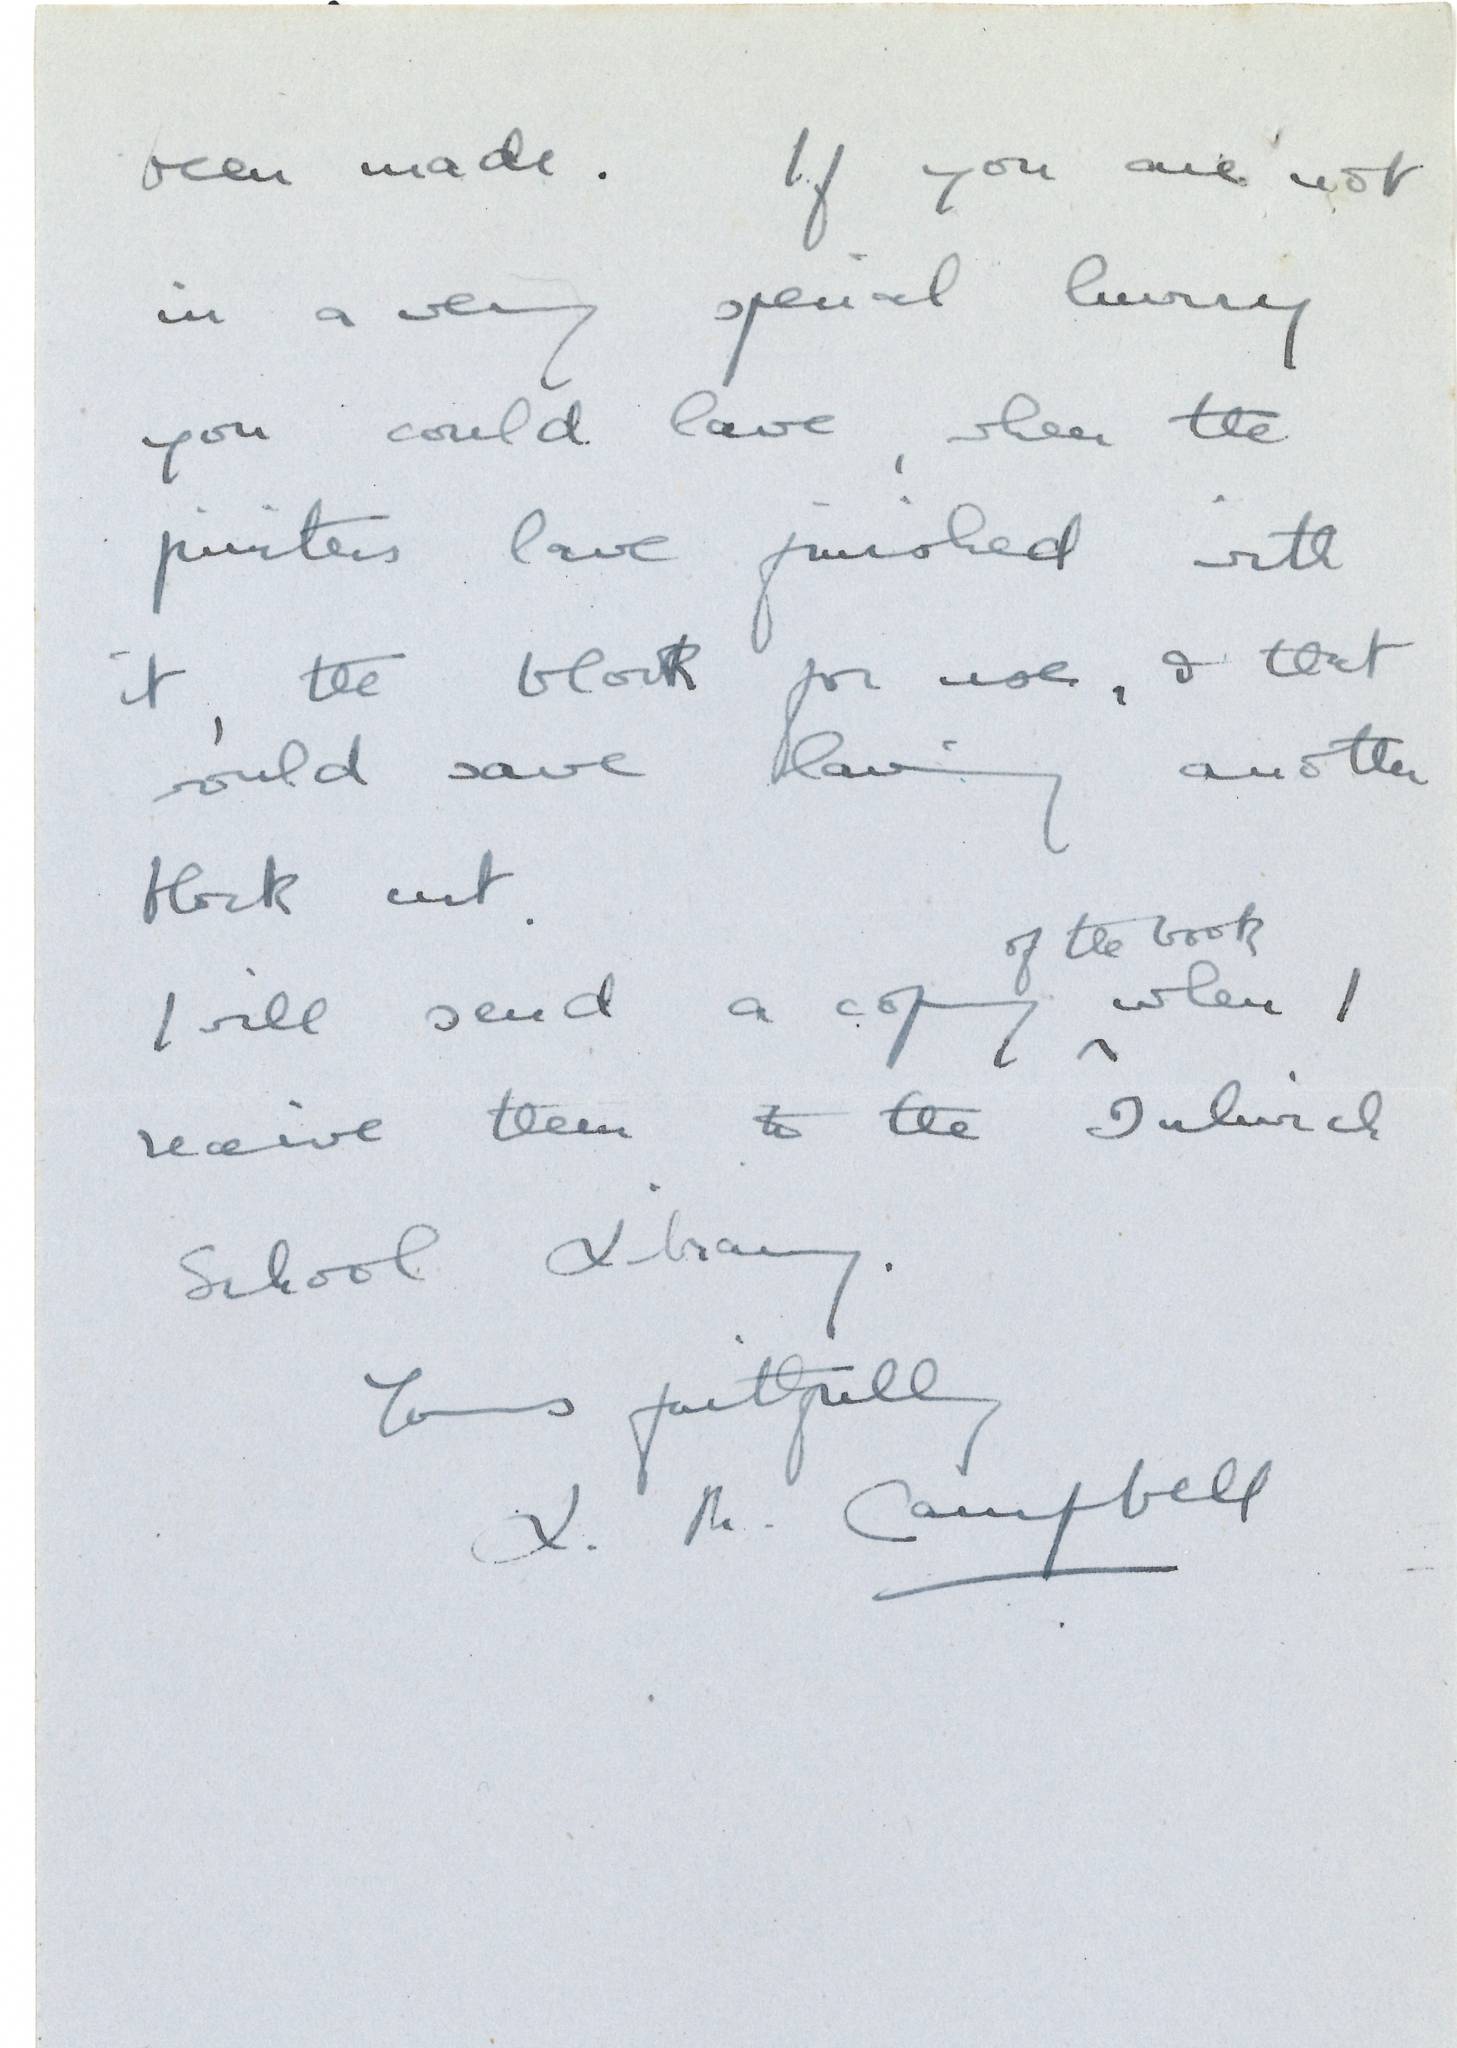 Campbell NP First Widow Letter 2